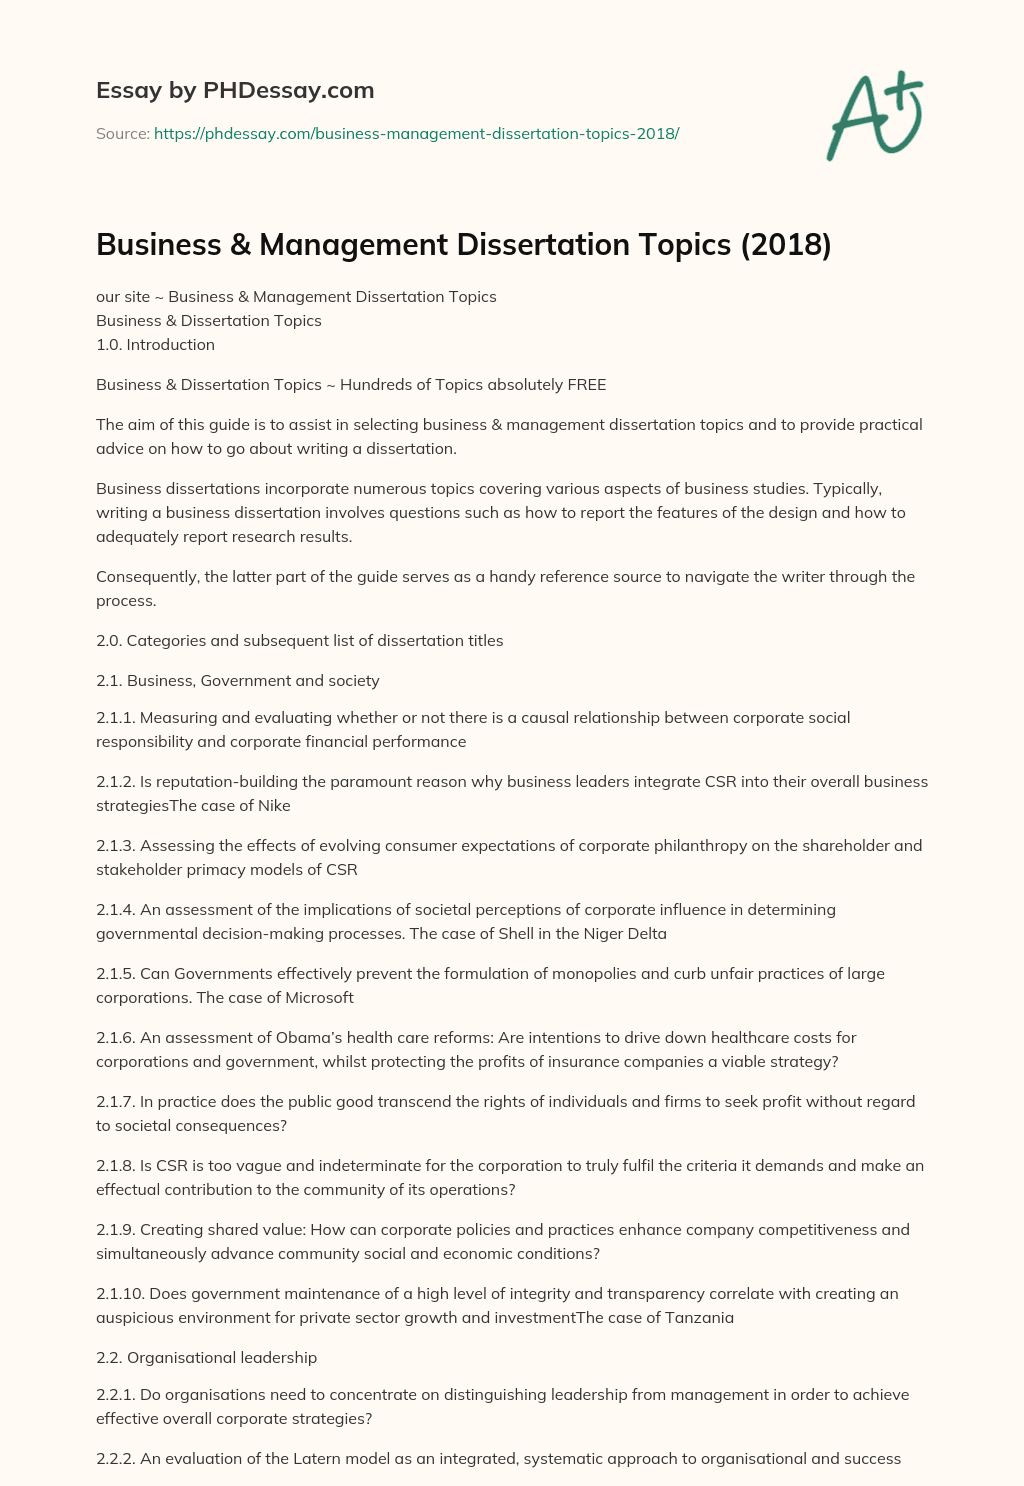 thesis topics for business management students